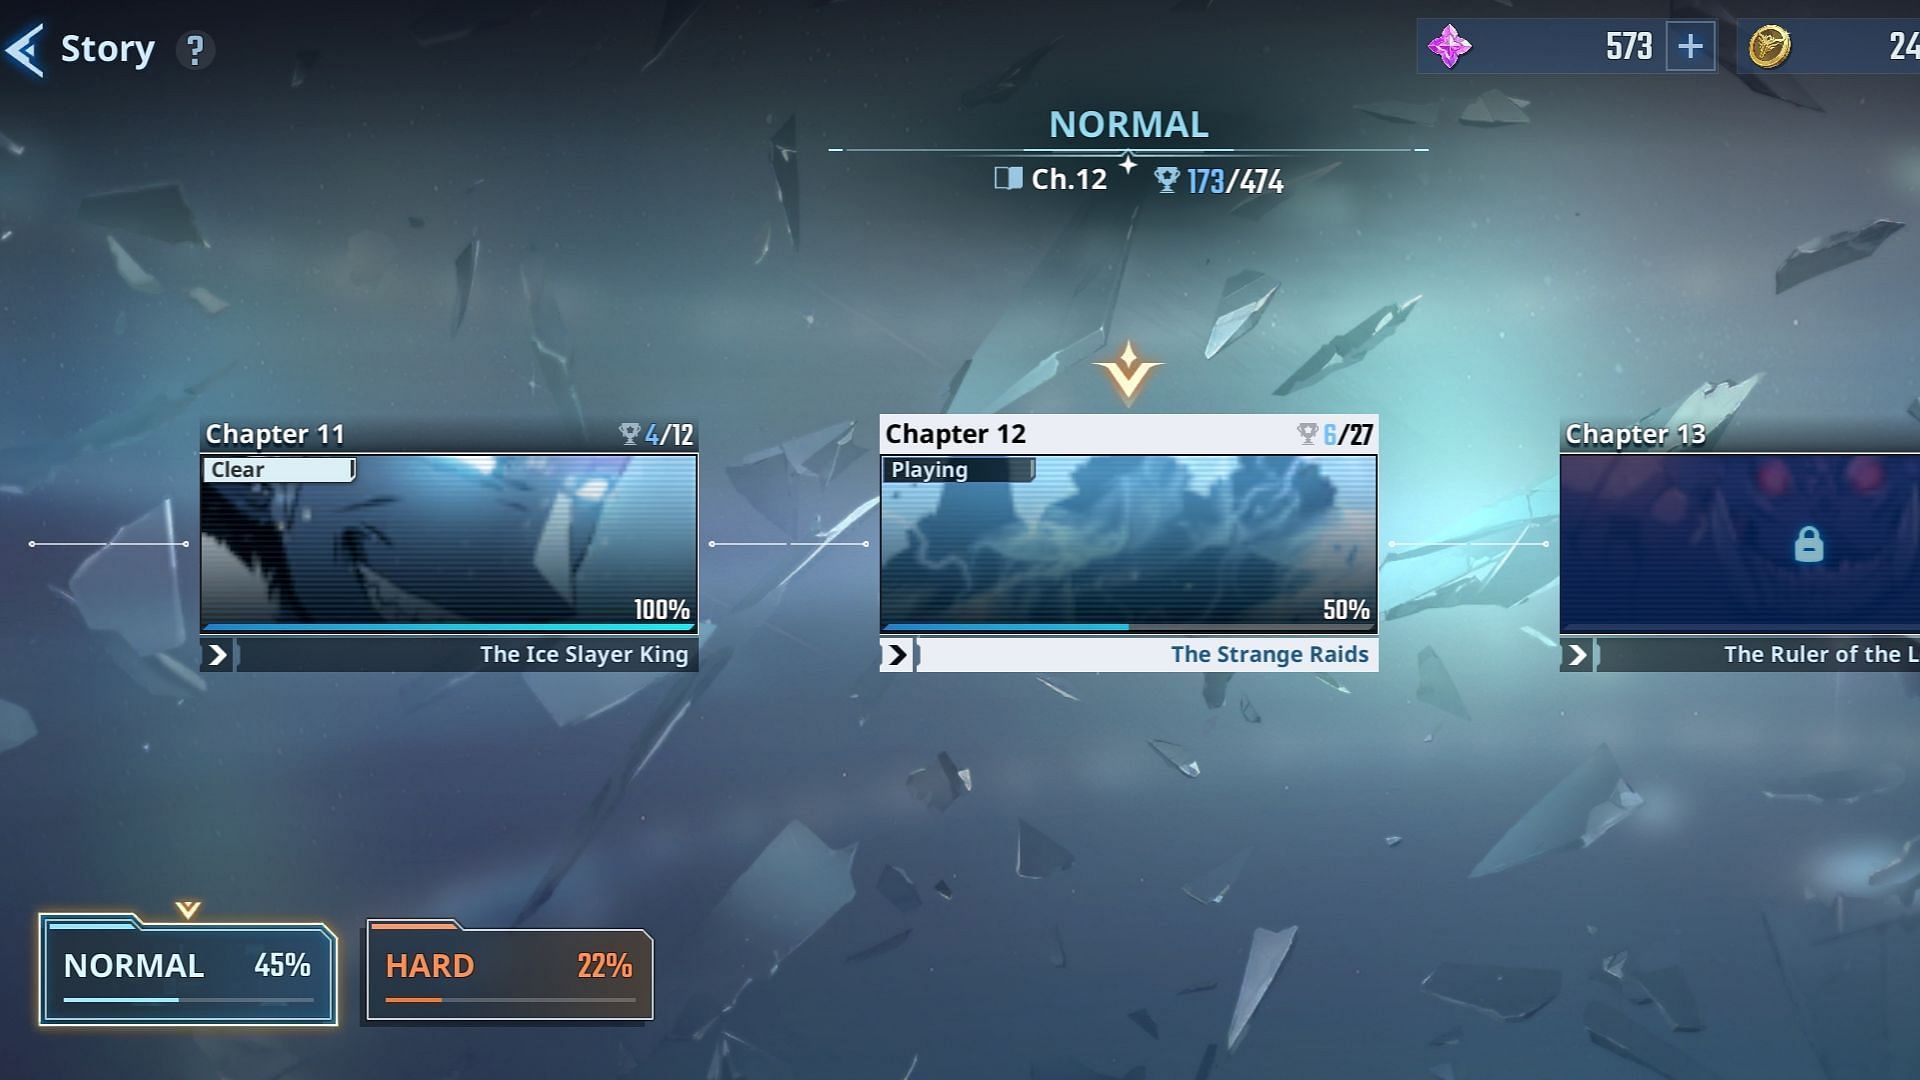 Play Story in Normal, Hard, and Reverse mode daily and progress. (Image via Netmarble)